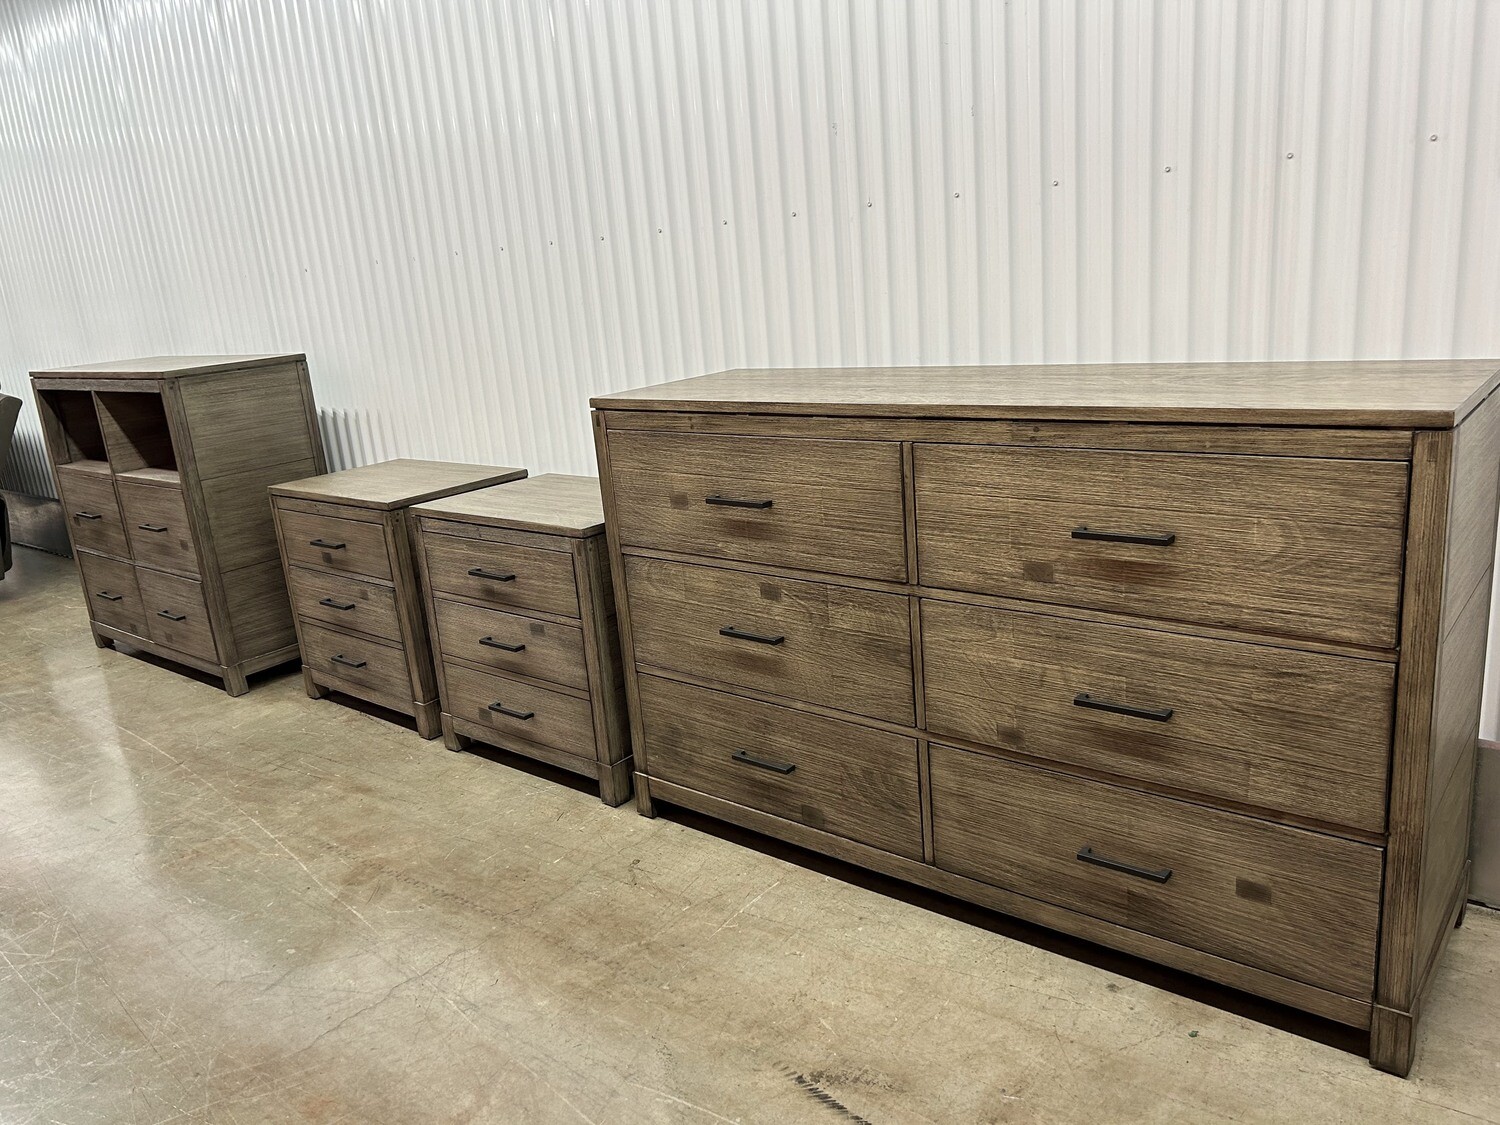 4-piece Dresser Set, weathered gray #2114 ** 3 days to sell, full price